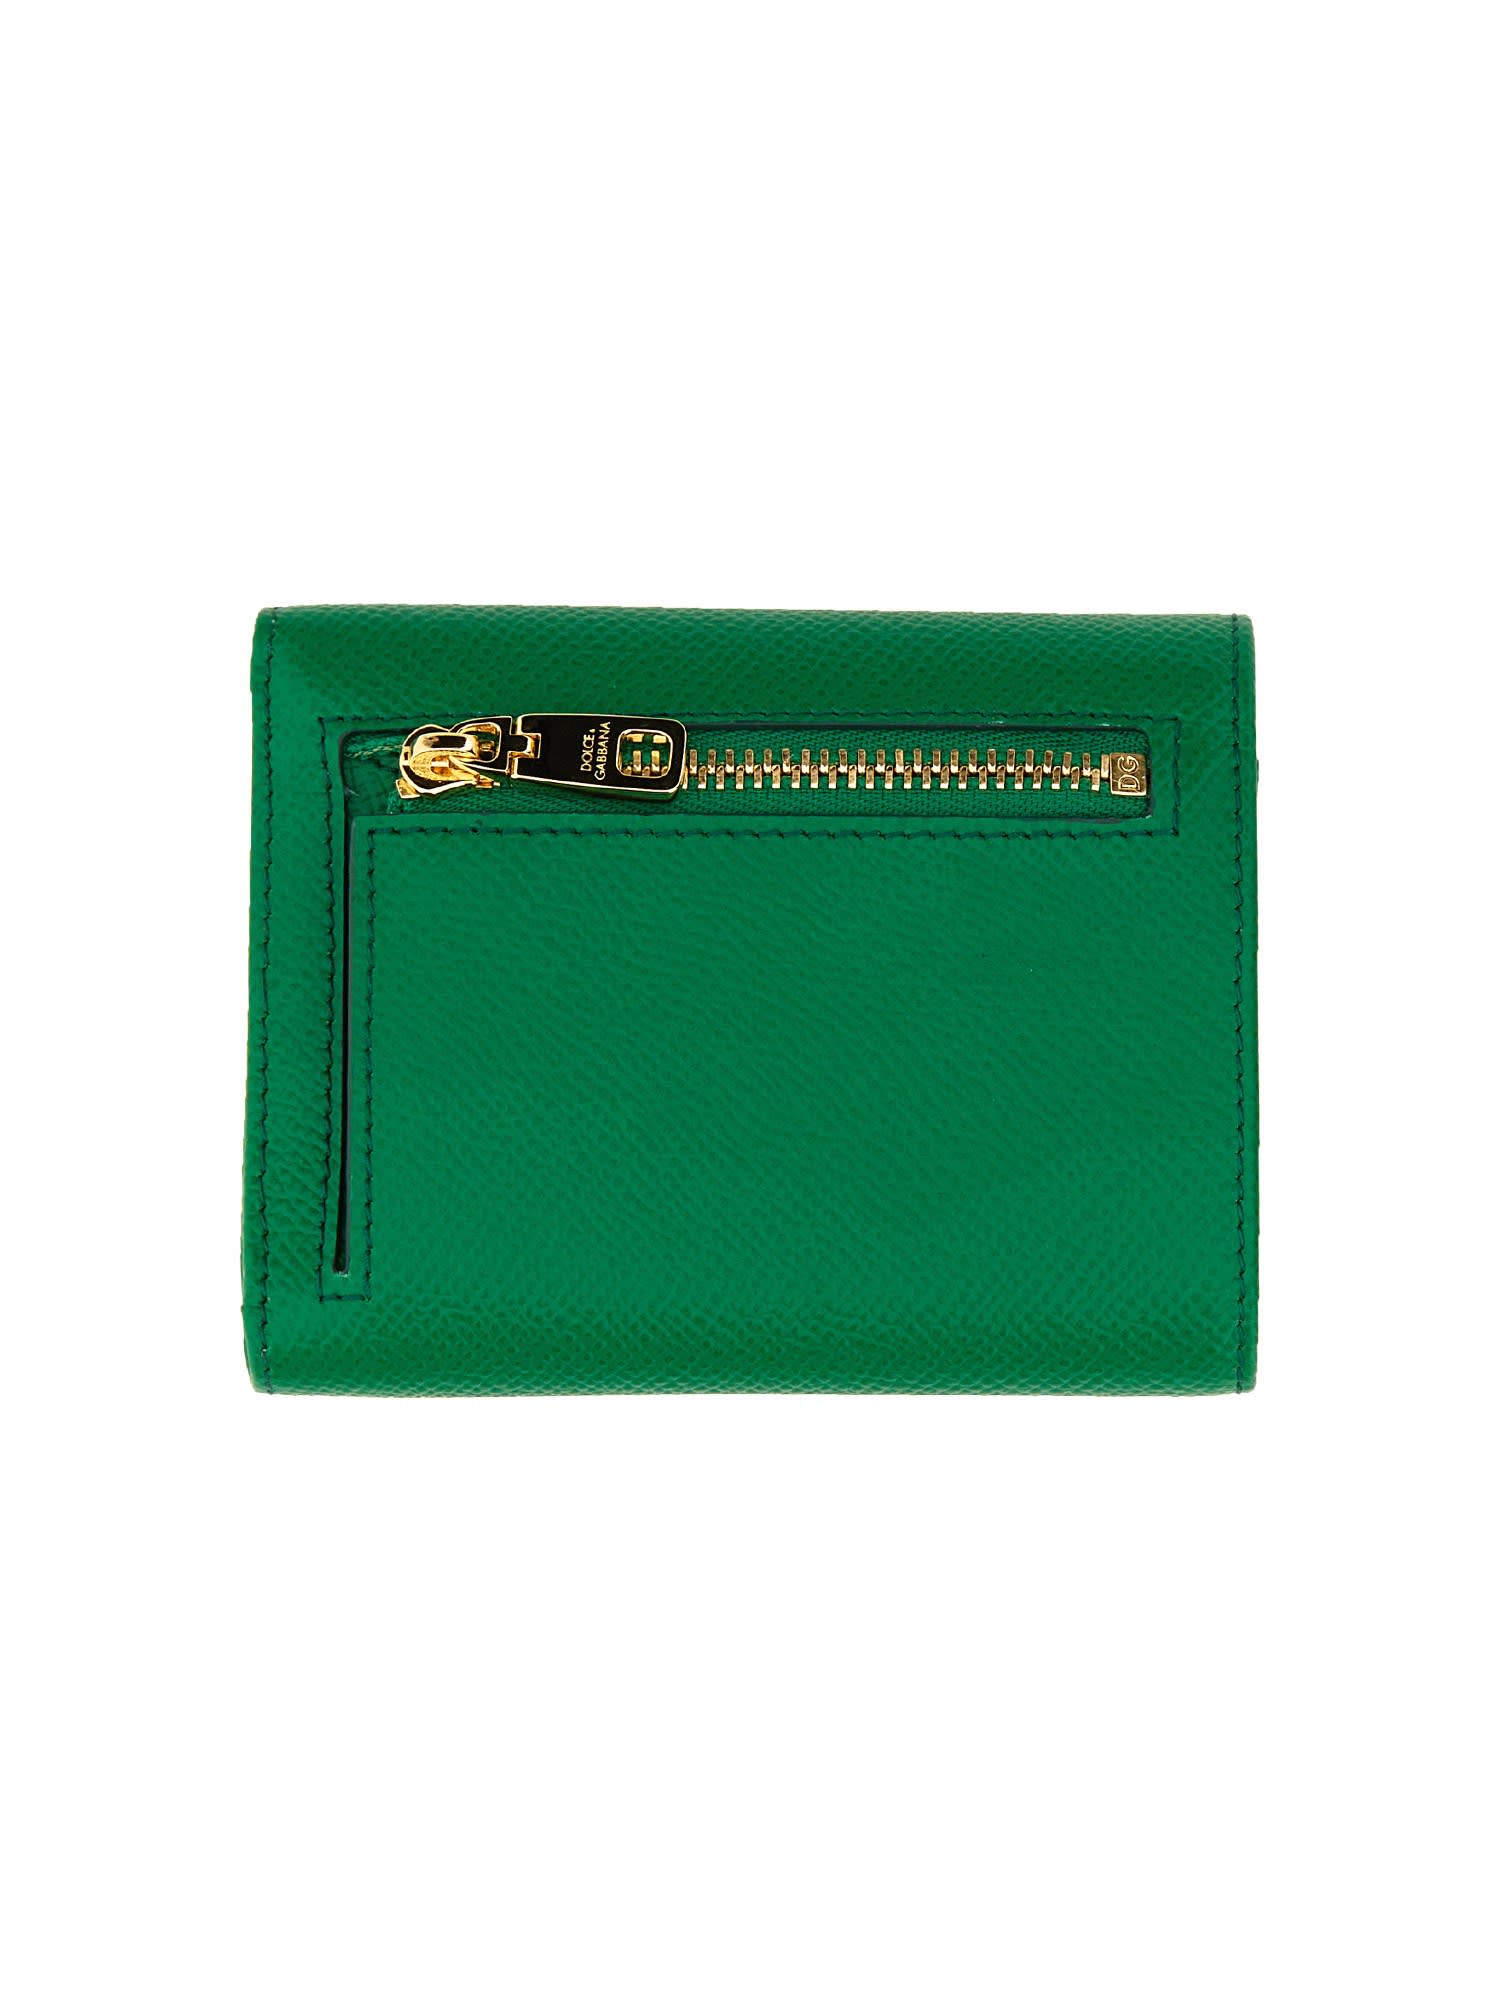 Dolce & Gabbana Small Leather Wallet | italist